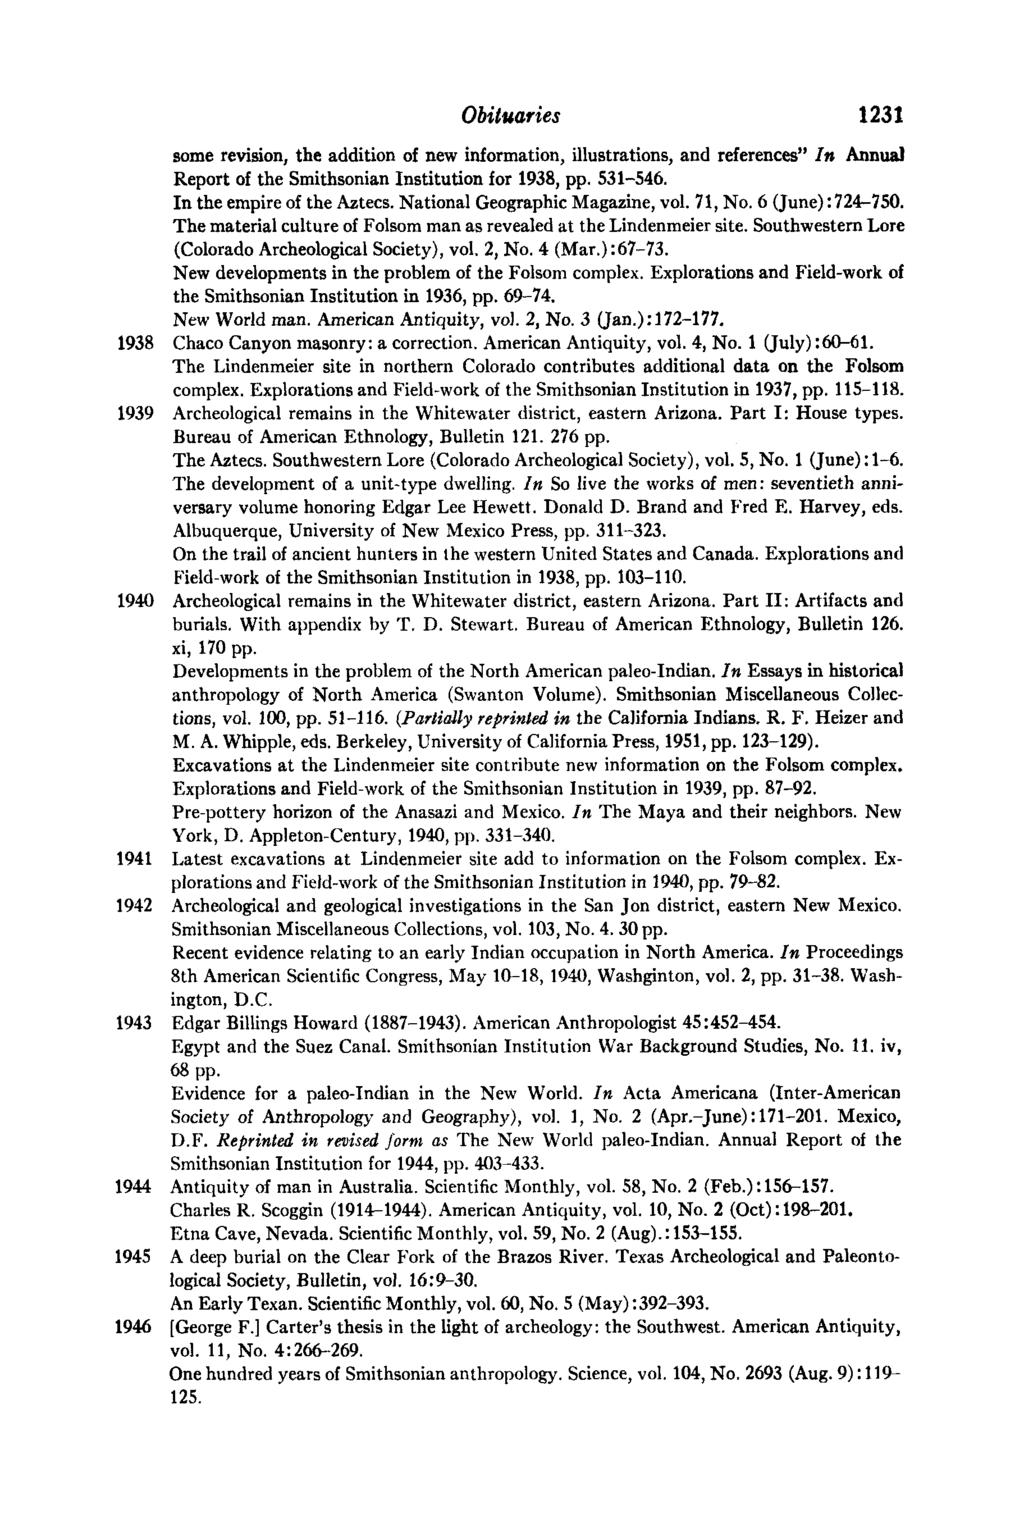 Obituaries 1231 some revision, the addition of new information, illustrations, and references In Annual Report of the Smithsonian Institution for 1938, pp. 531-546. In the empire of the Aztecs.